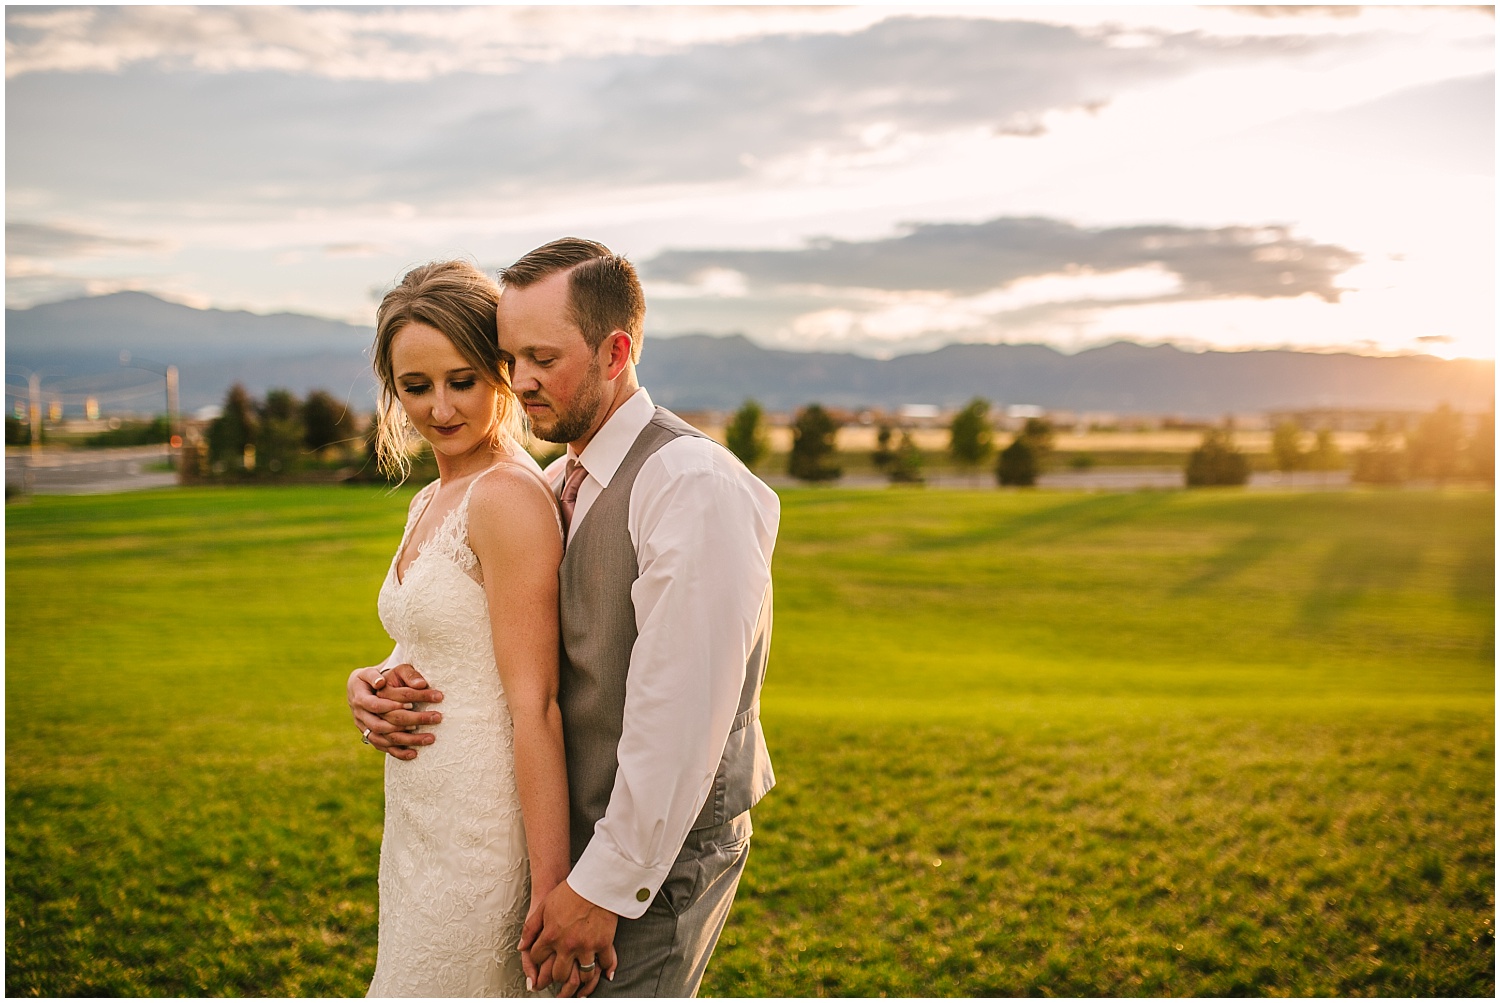 Bride and groom embrace at golden hour after thunderstorm in Colorado Springs